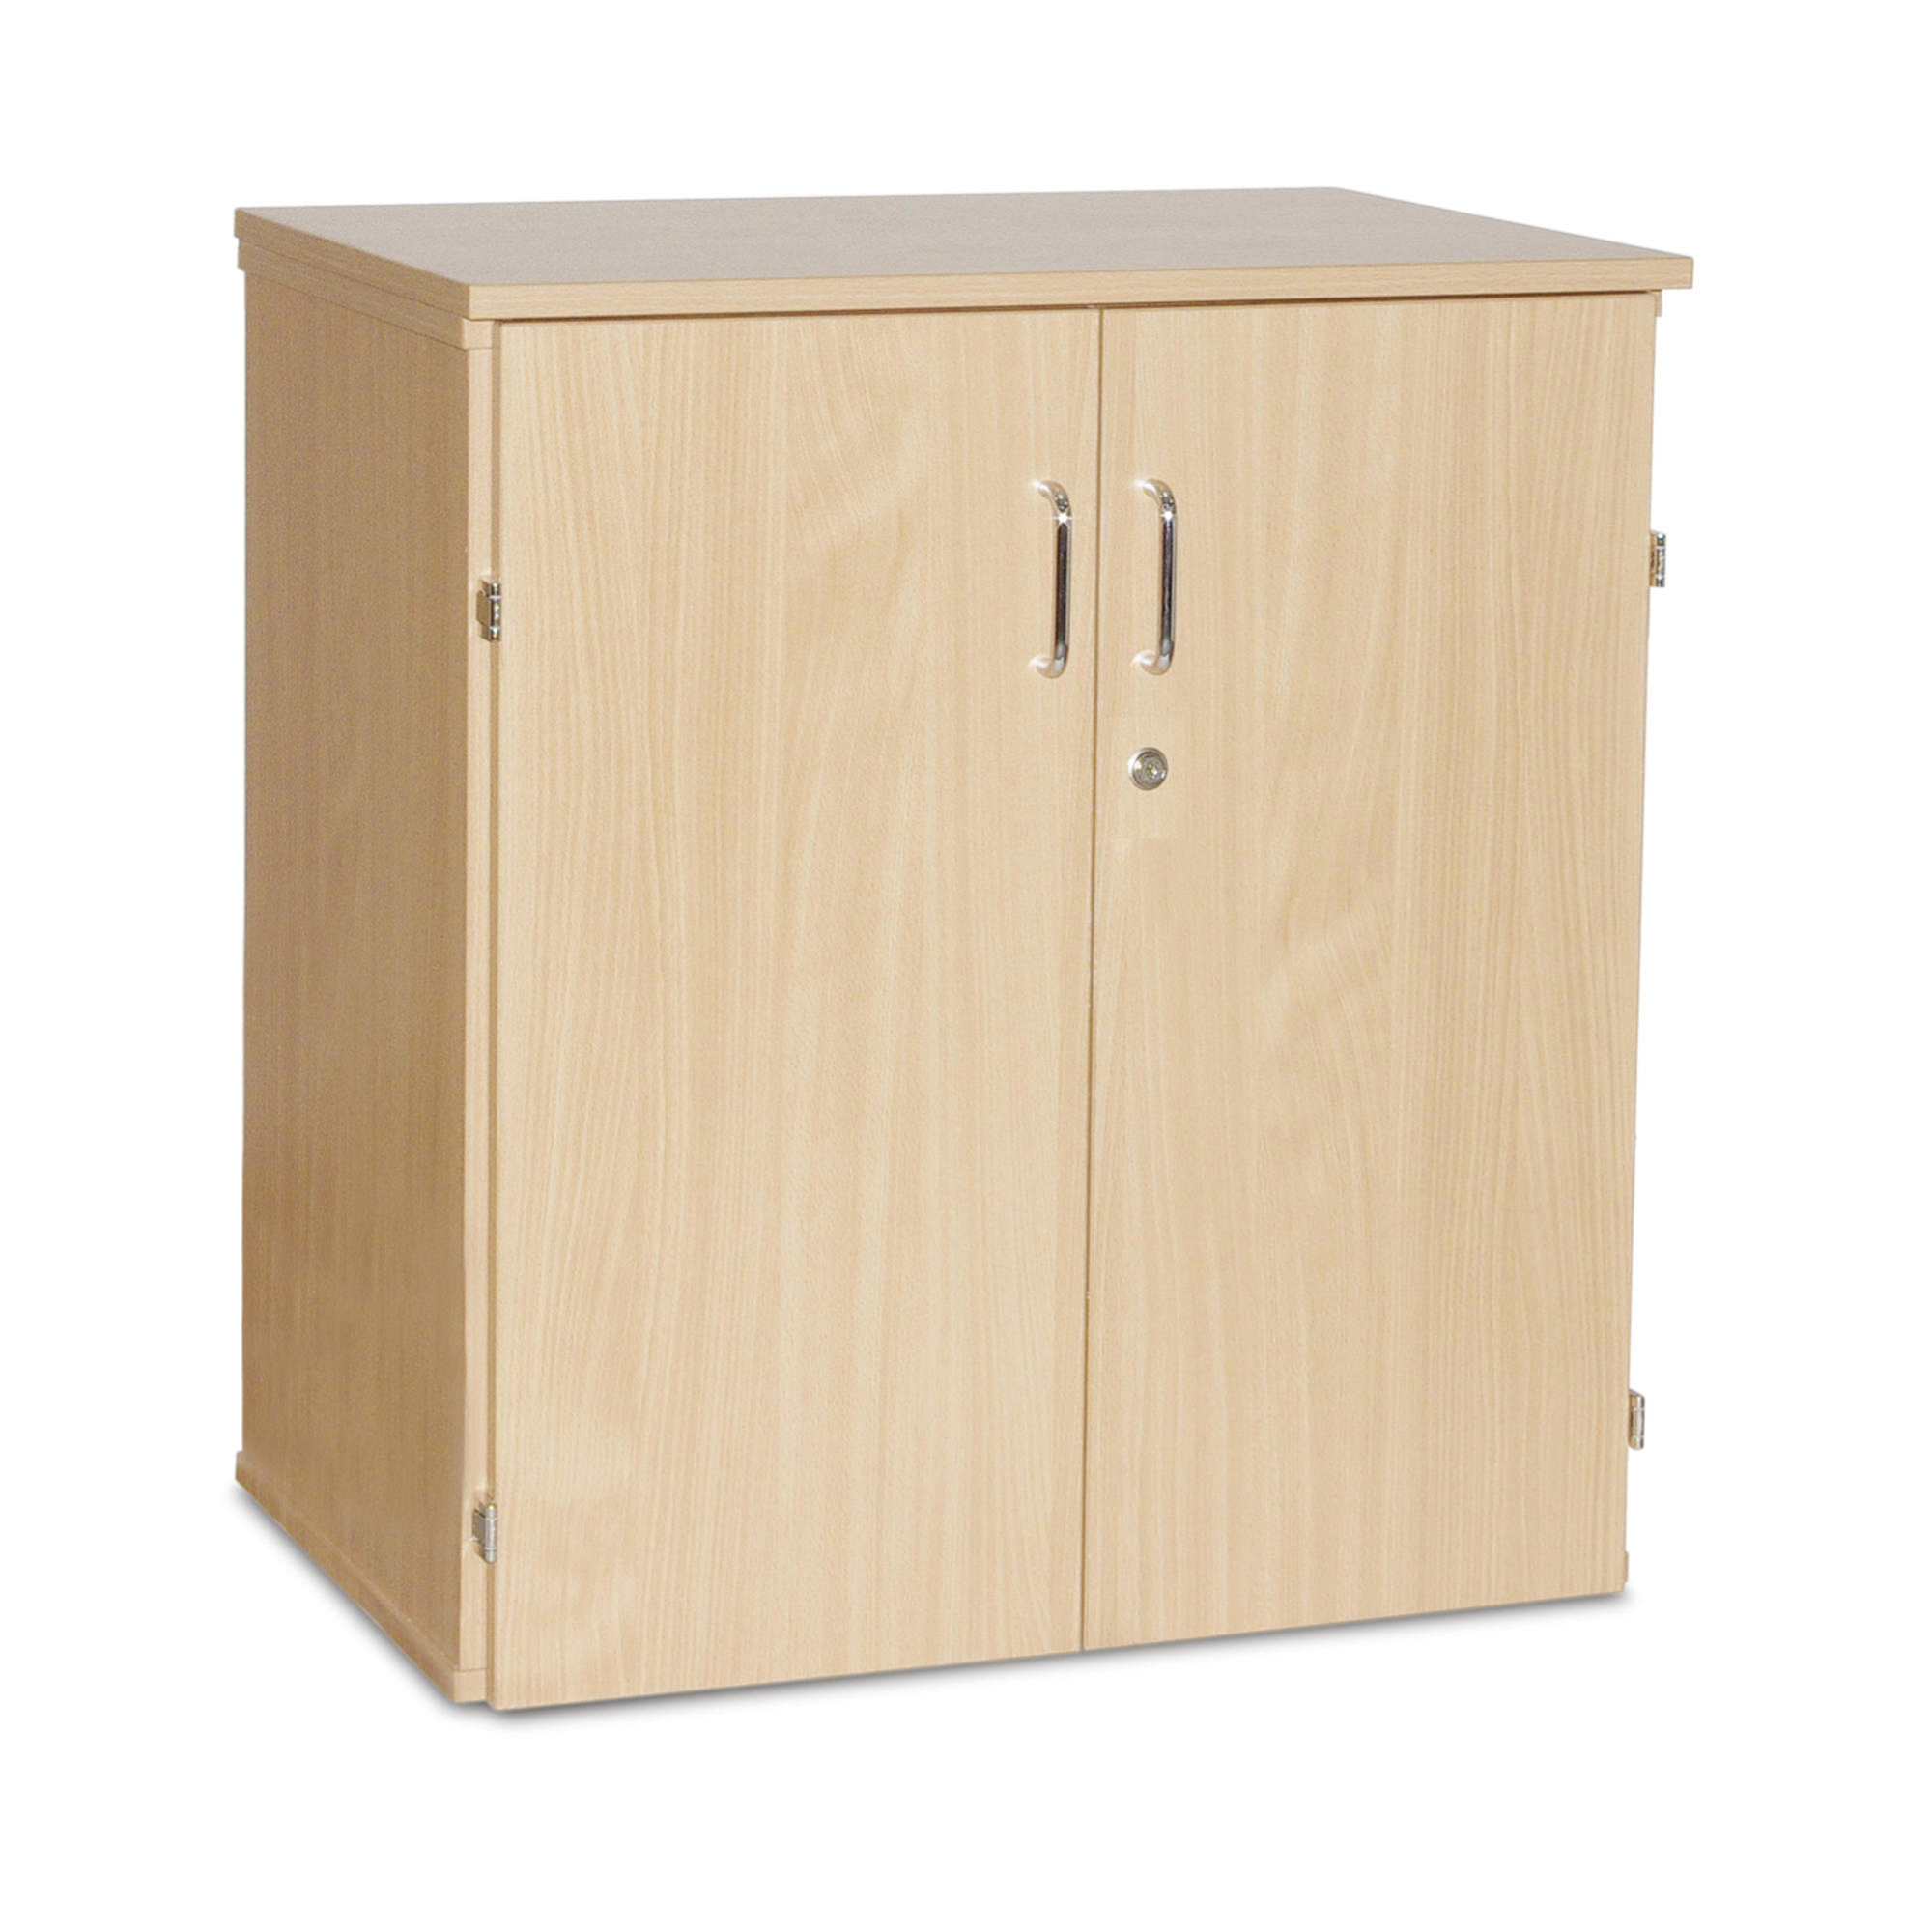 Stackable Cupboard Unit With 1 Shelf Hc1693981 Findel